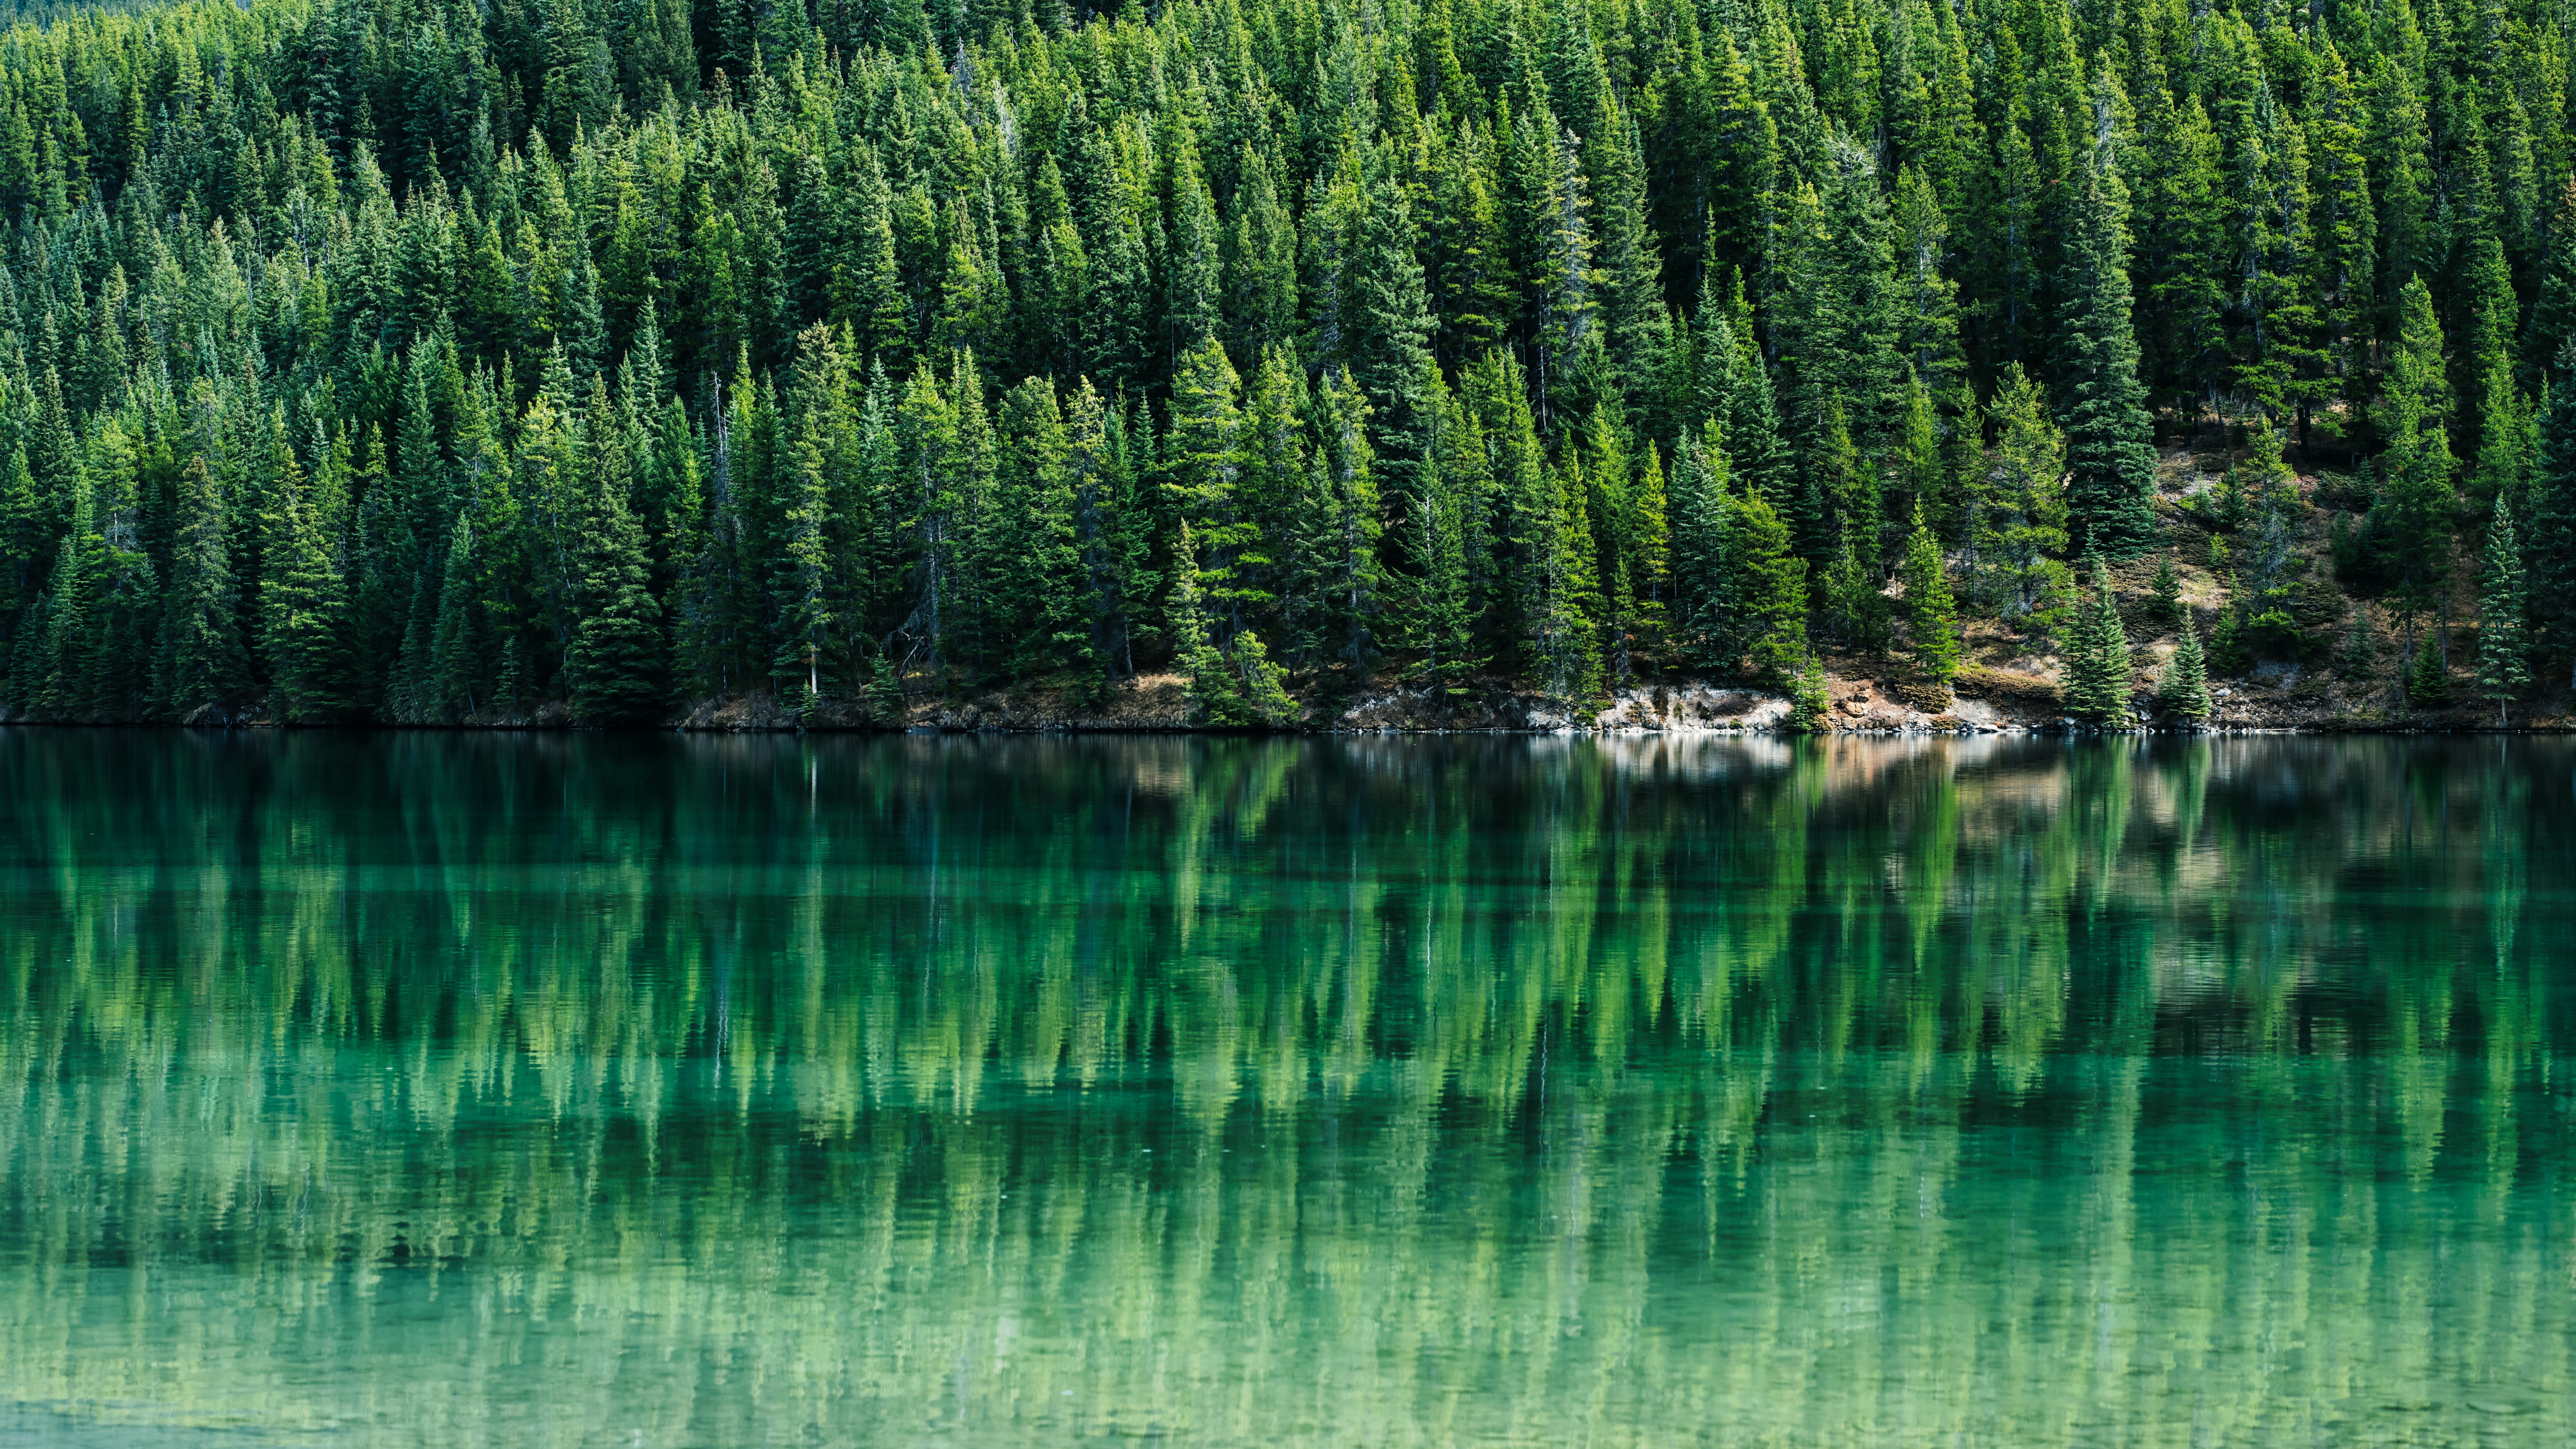 https://4kwallpapers.com/images/wallpapers/green-trees-pine-trees-reflections-lake-tranquility-6016x3384-6315.jpg